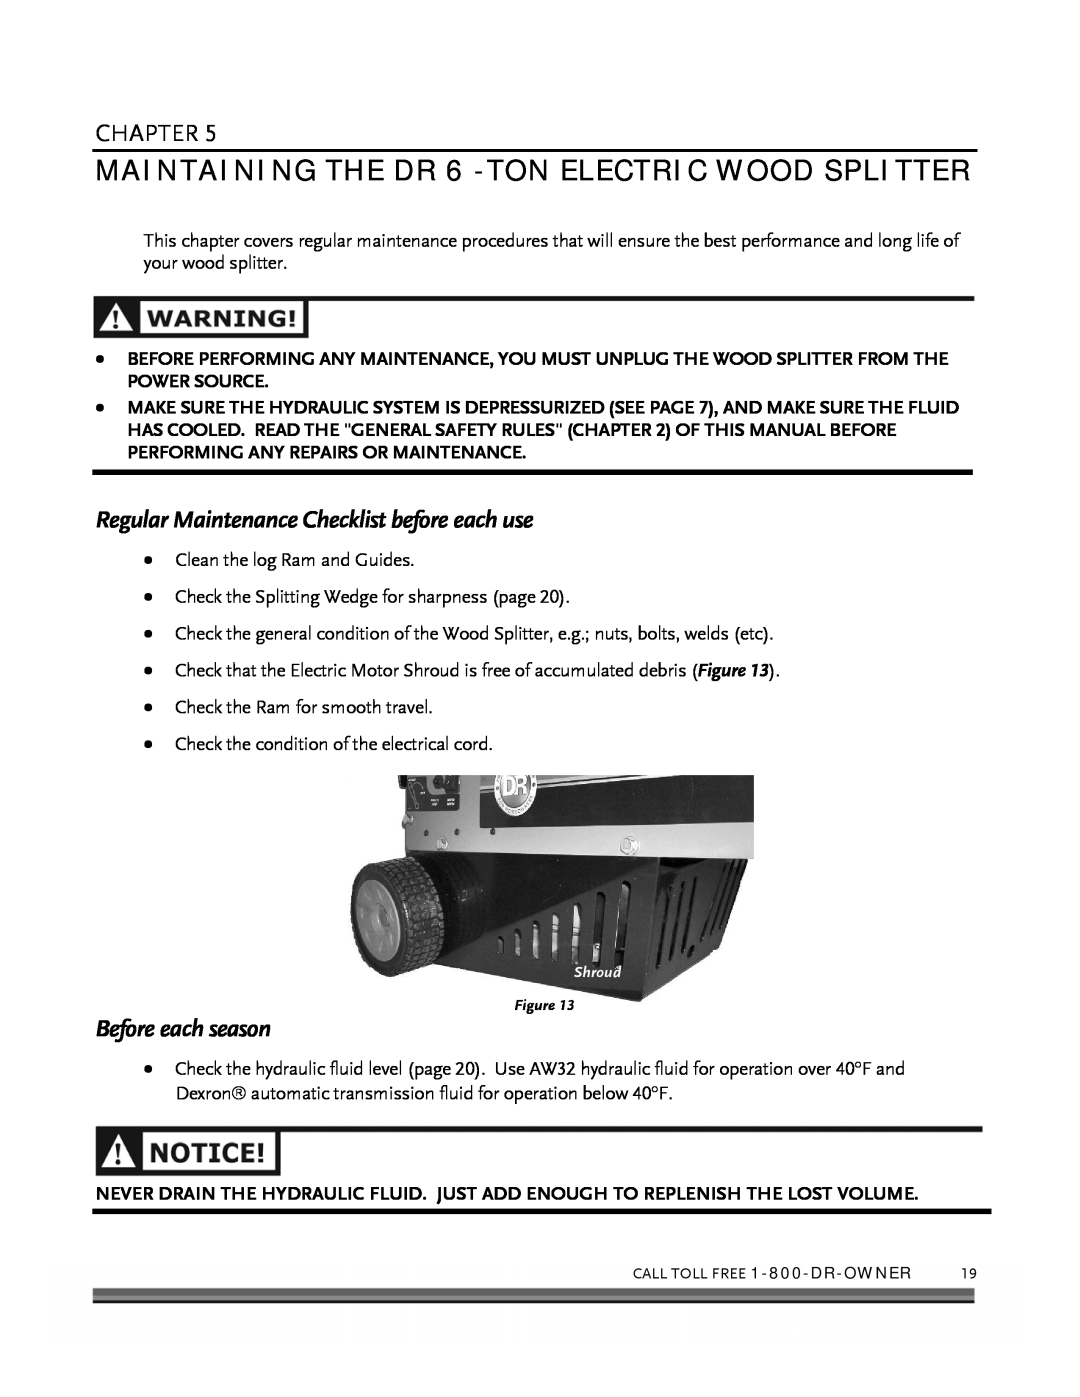 Country Home Products 6-TON MAINTAINING THE DR 6 -TONELECTRIC WOOD SPLITTER, Regular Maintenance Checklist before each use 